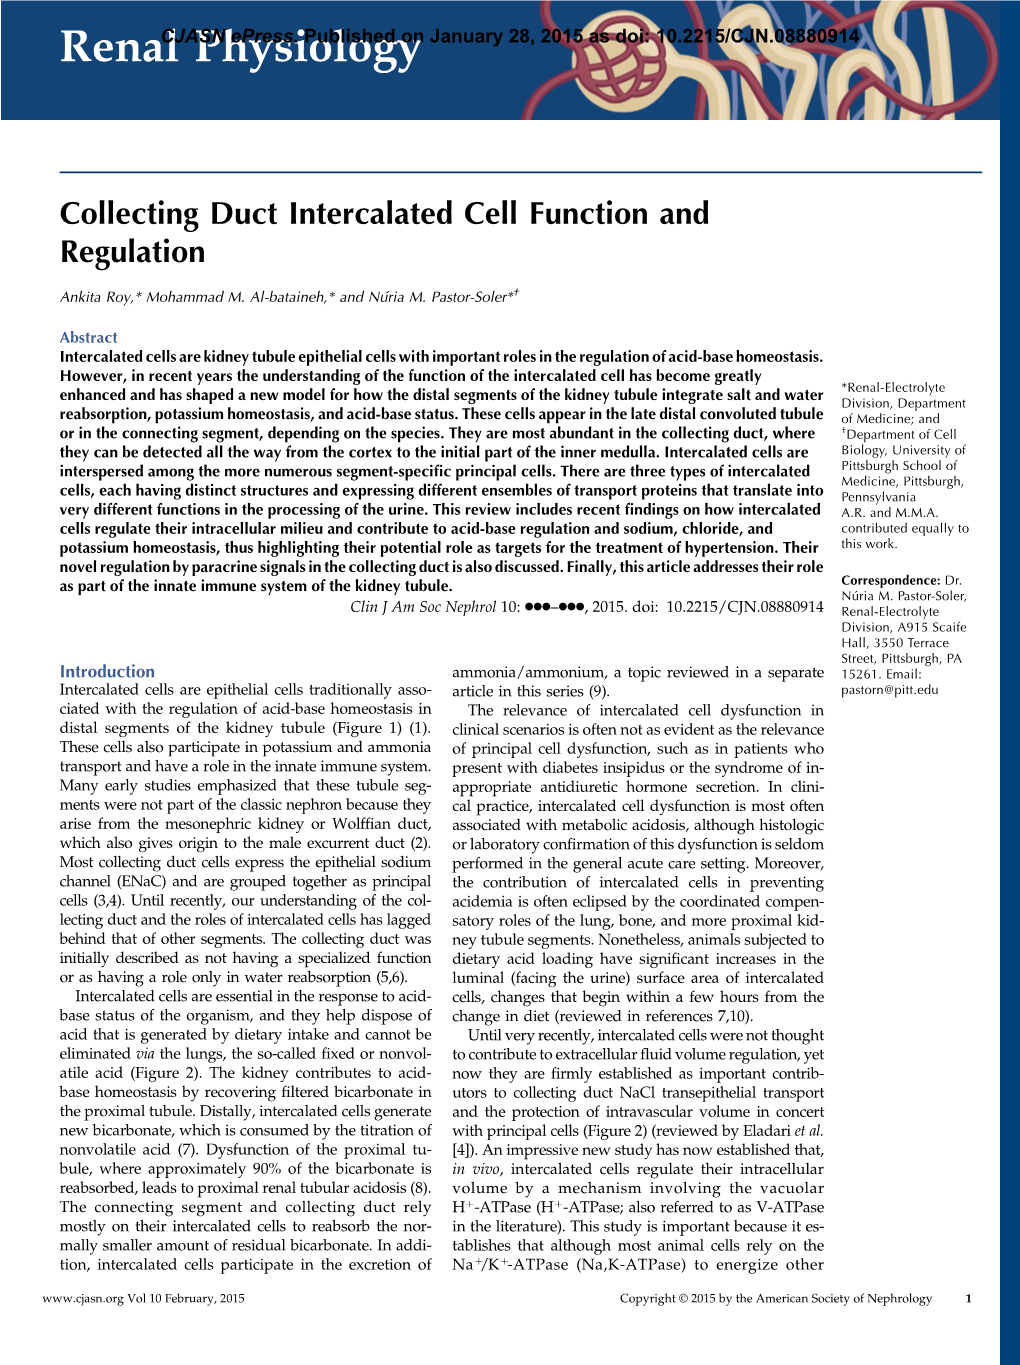 Collecting Duct Intercalated Cell Function and Regulation